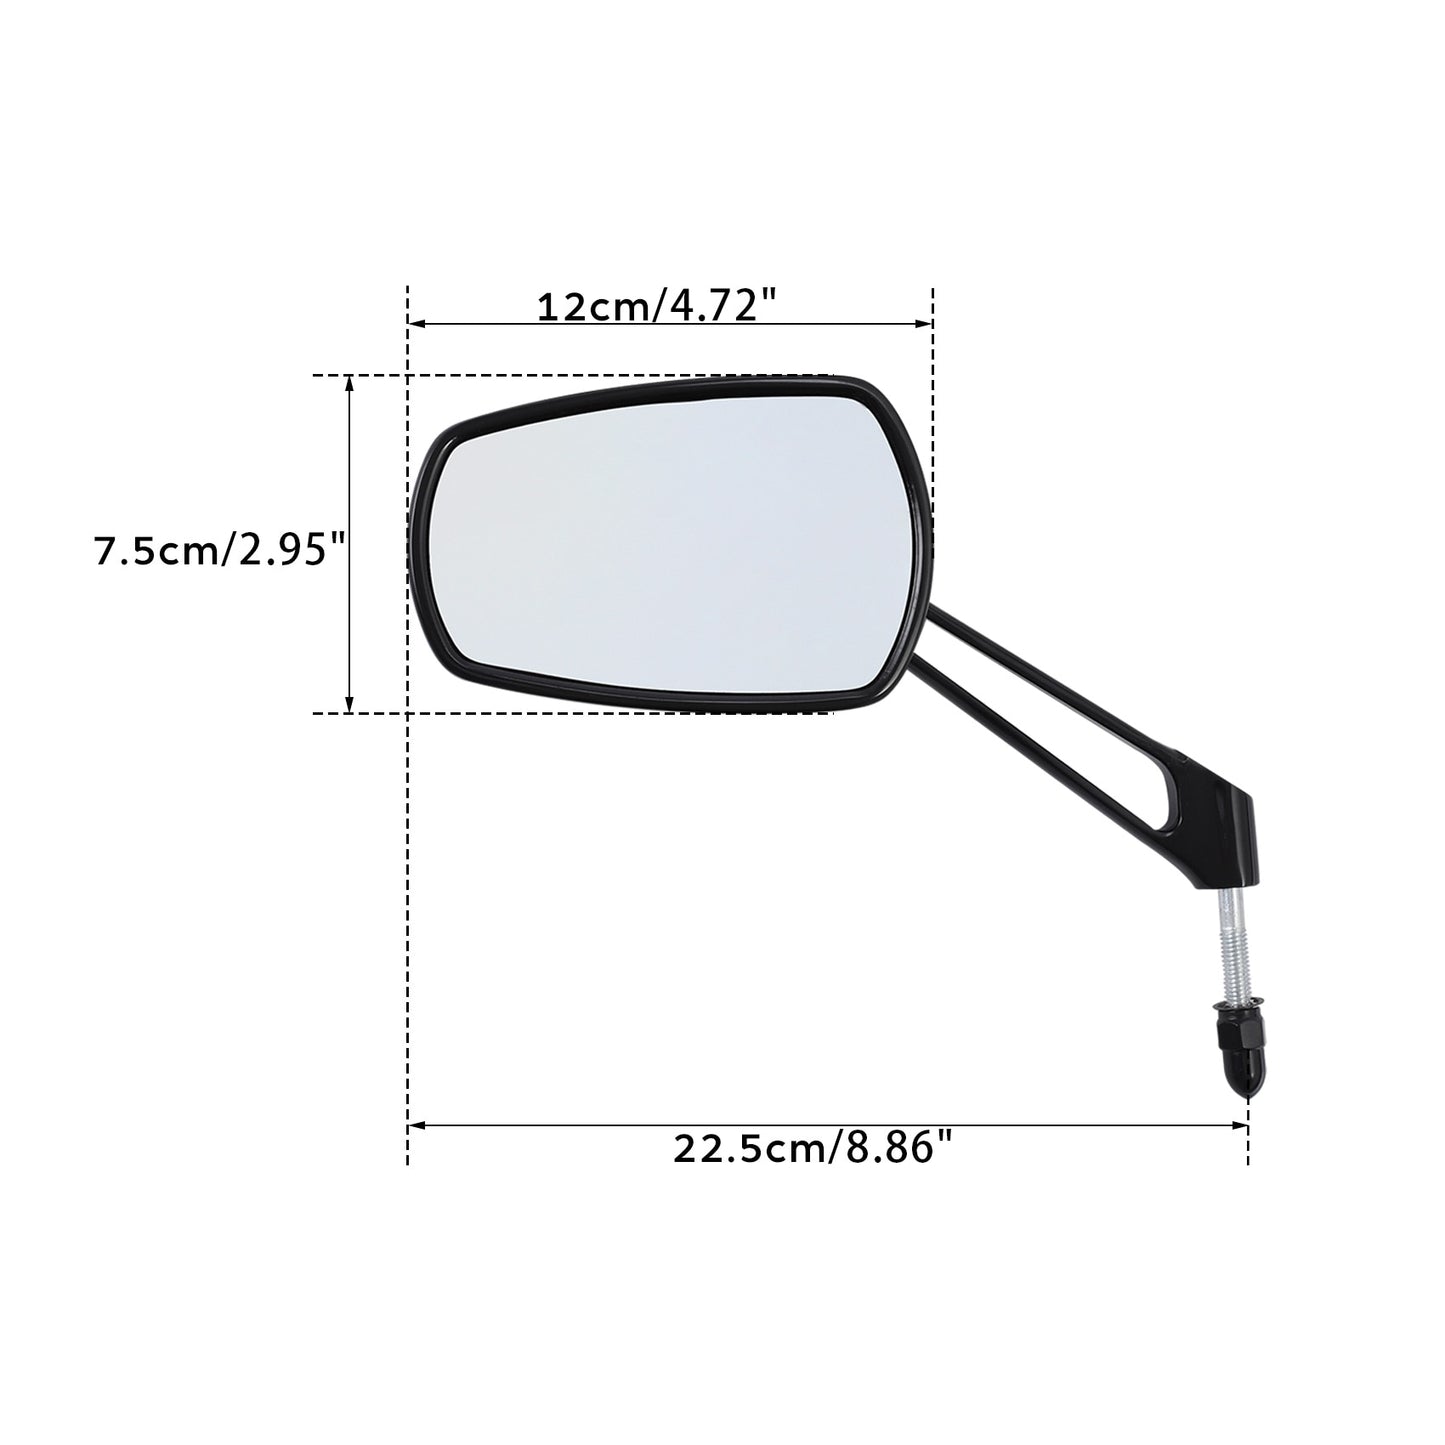 Voodoo Cycle House Custom Mirrors For Harley-Davidson & Custom Applications Touring Street Glide Road King Dyna Fat Boy Bob Low Rider Softail Slim Sportster 883